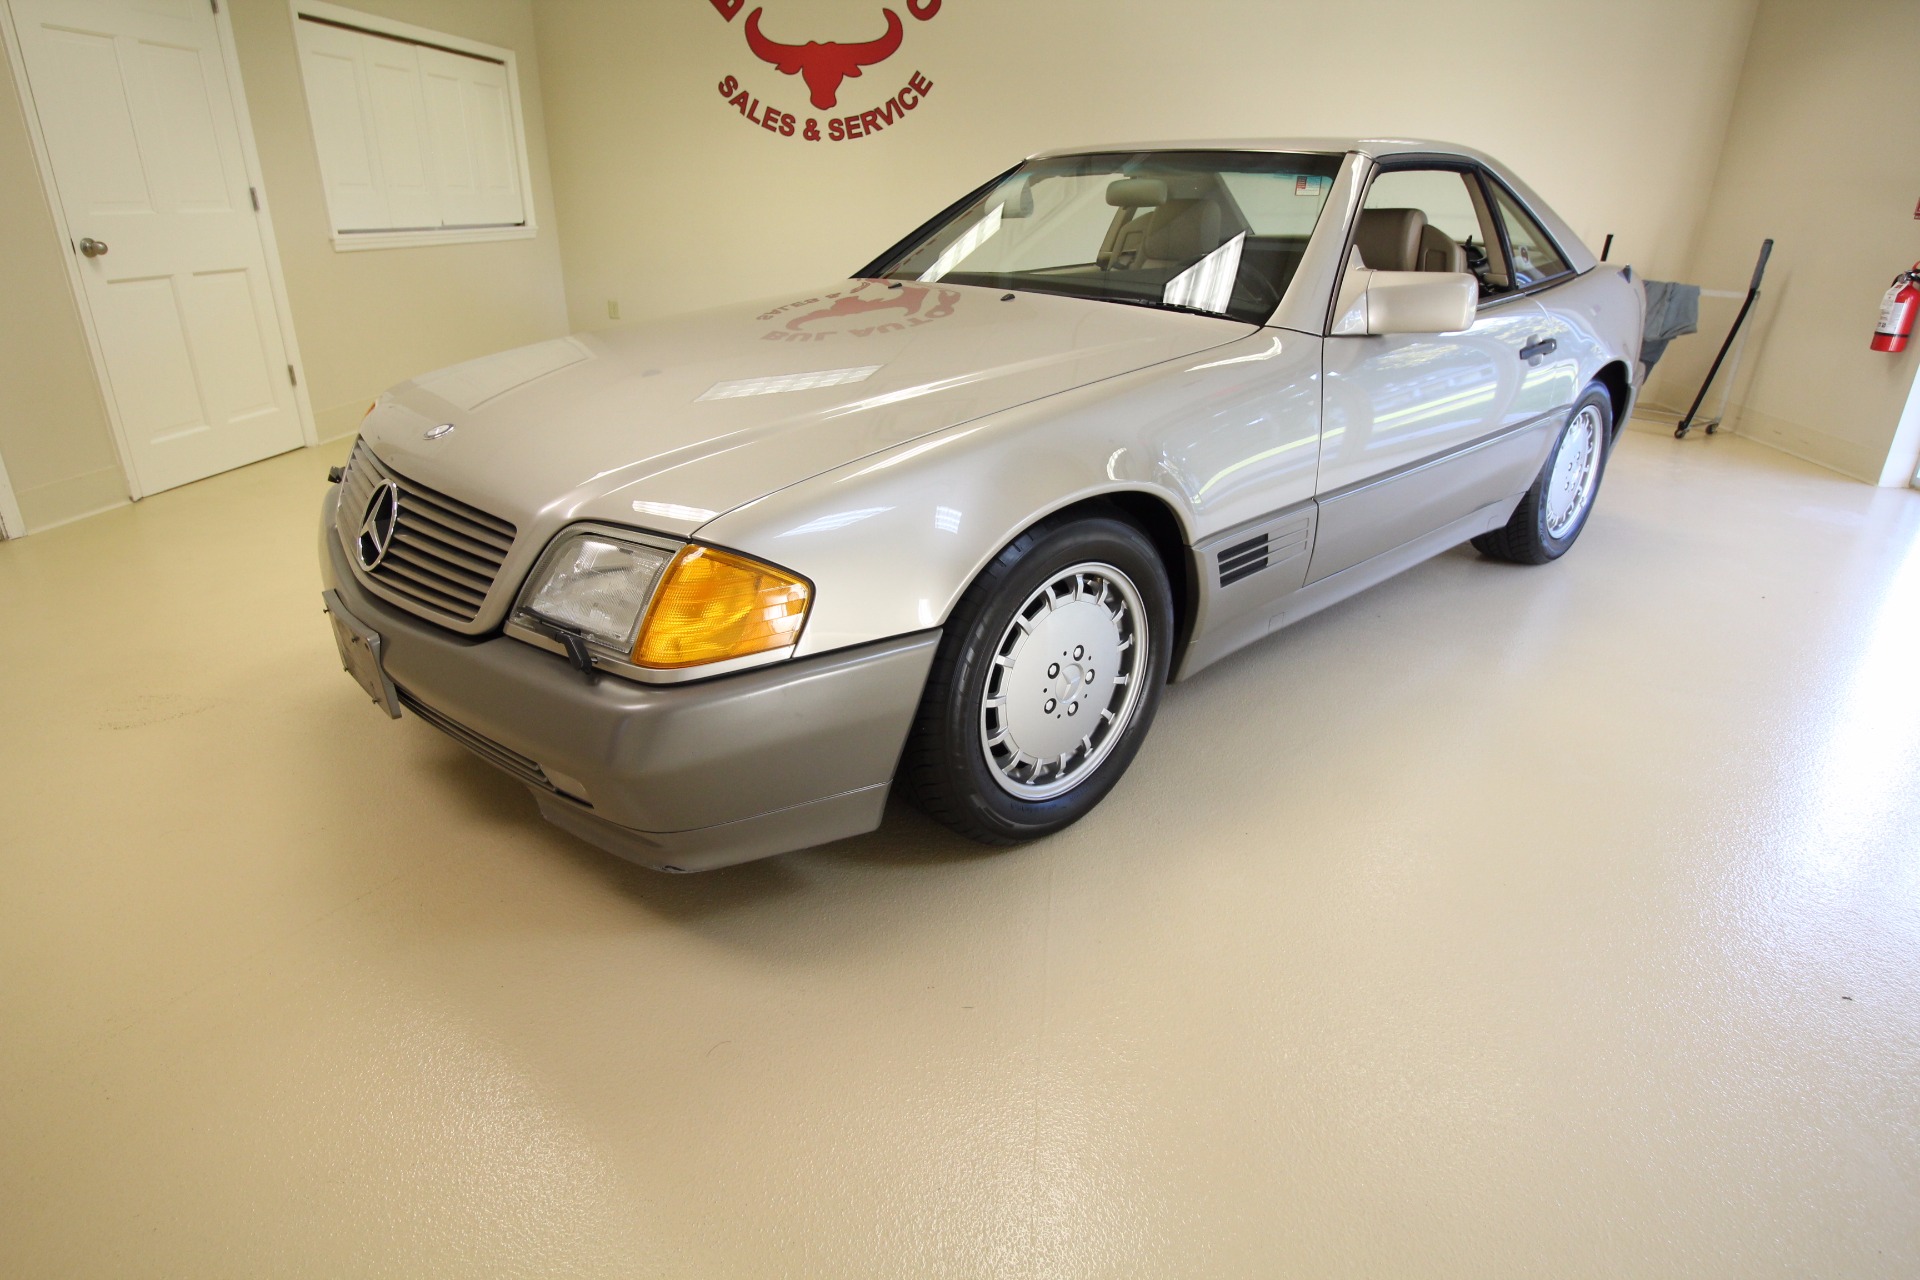 Used 1992 Mercedes-Benz SL-Class 500SL coupe | Albany, NY